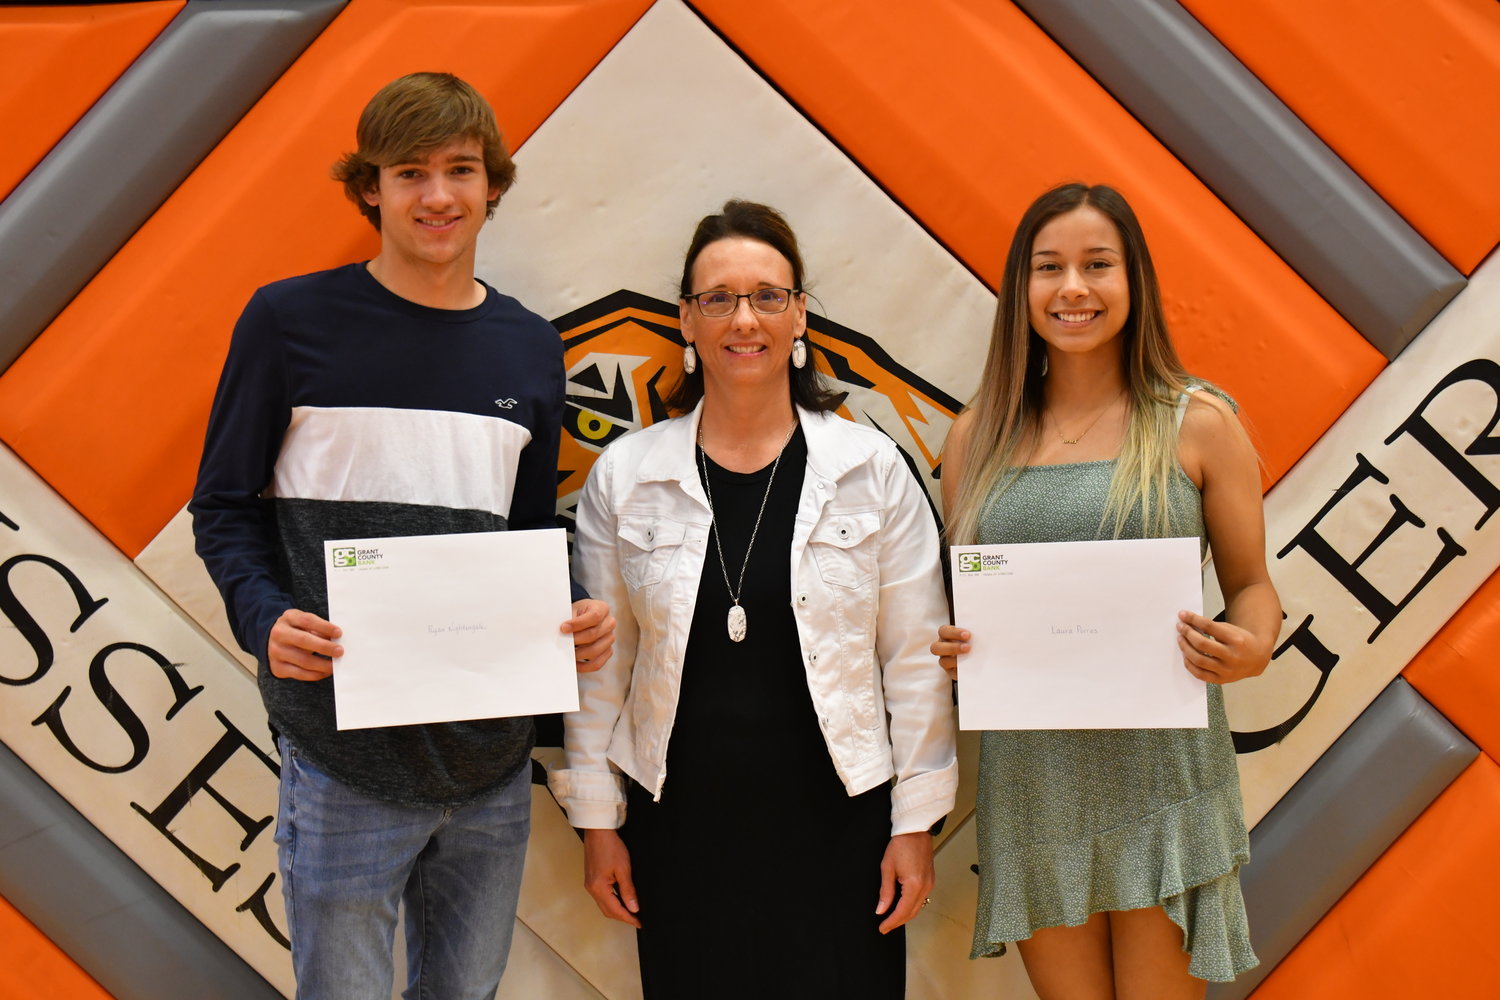 Senior Awards — Ryan Nightengale and Laura Porras were given the Big Orange Boosters Scholarship by Margaret Nightengale on Friday, May 13, 2022.